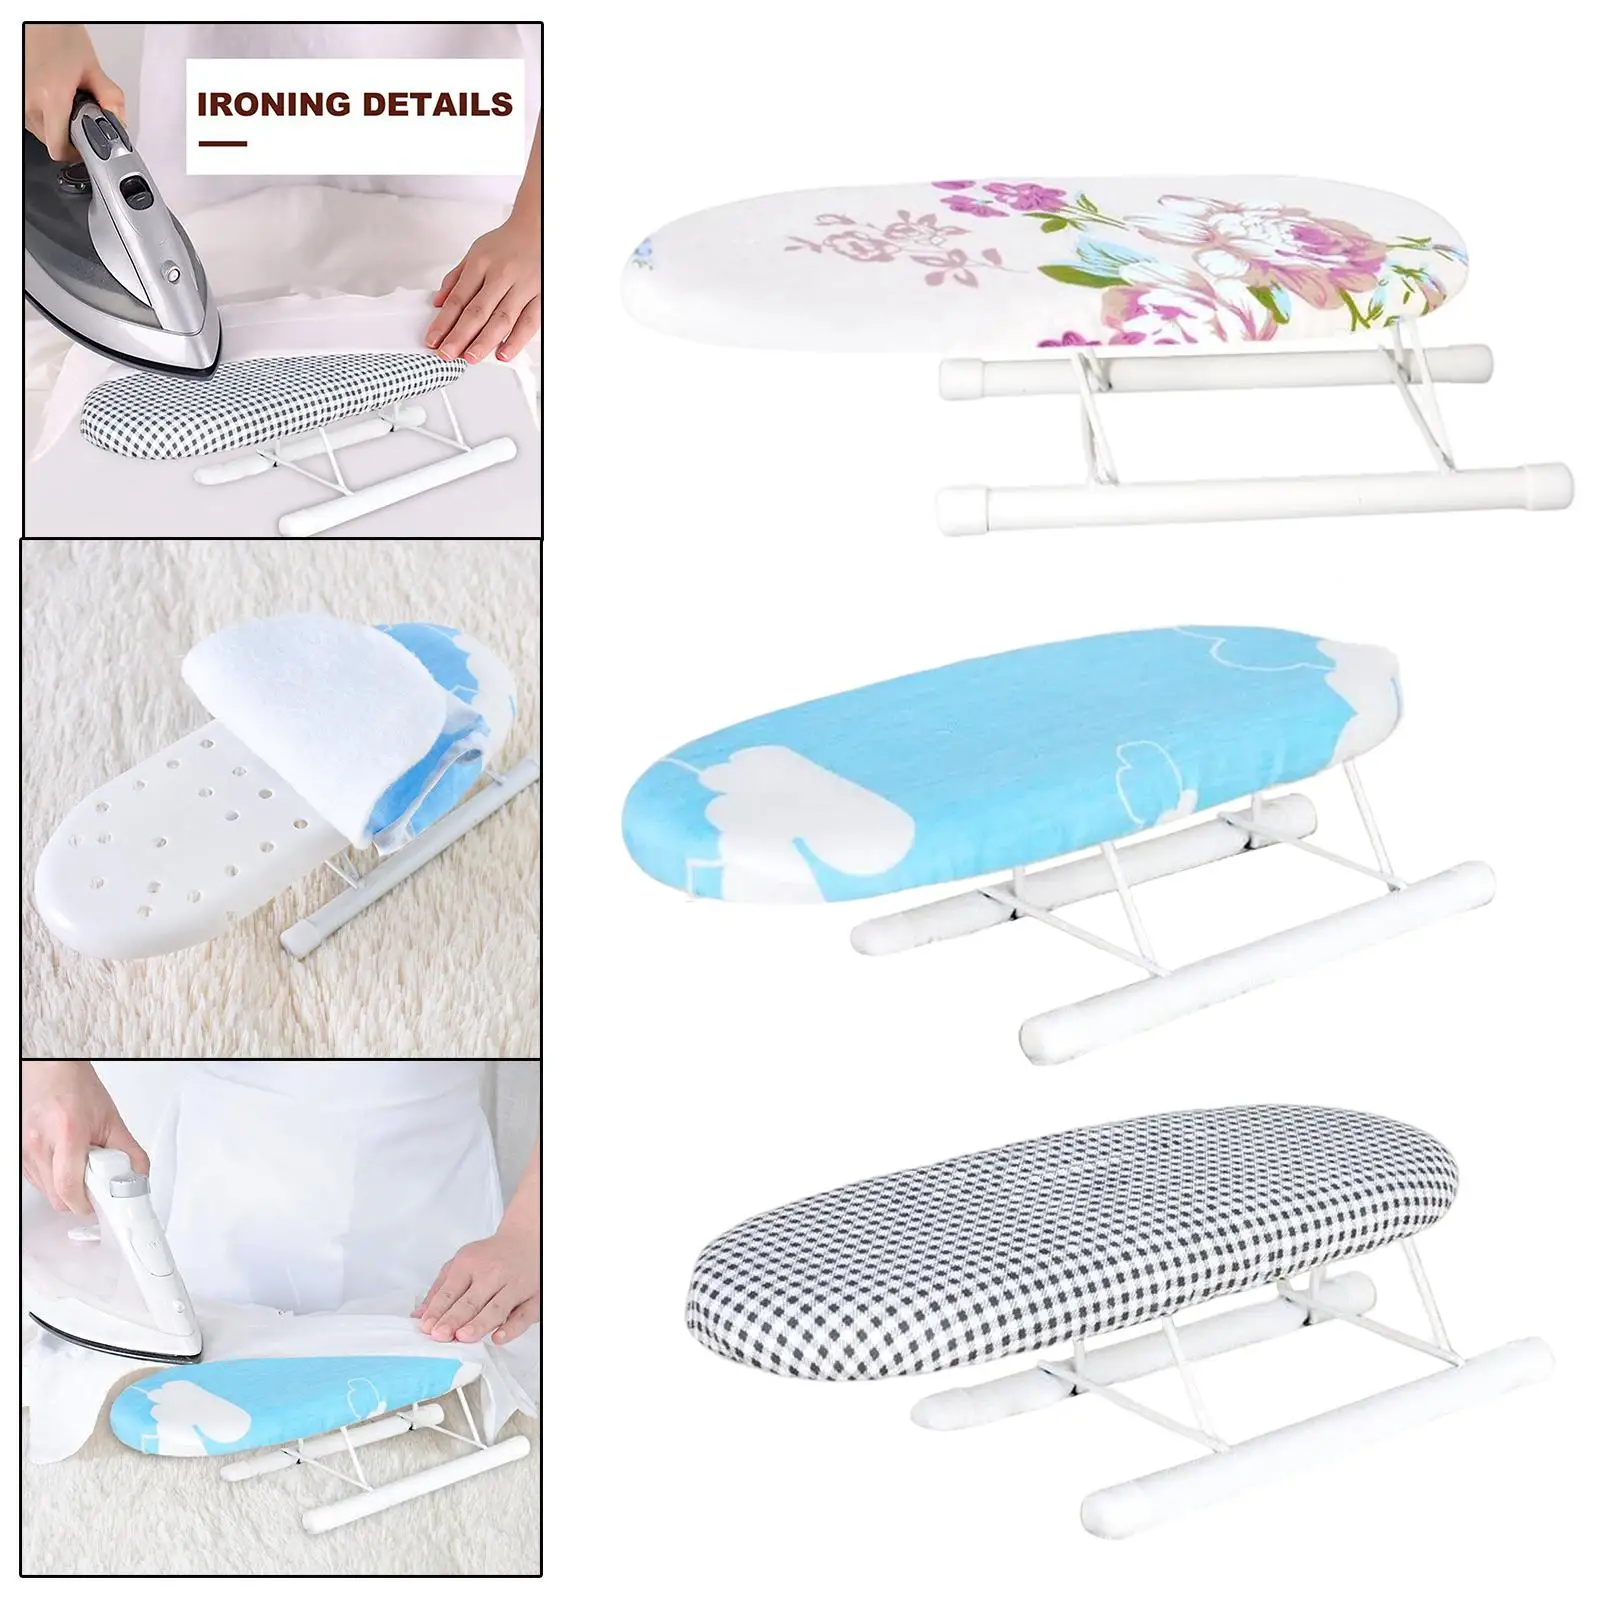 Mini Ironing Board Foldable Washable Sleeve Cuffs Collars Removable for Travel Laundry Sewing Room Dorm Household